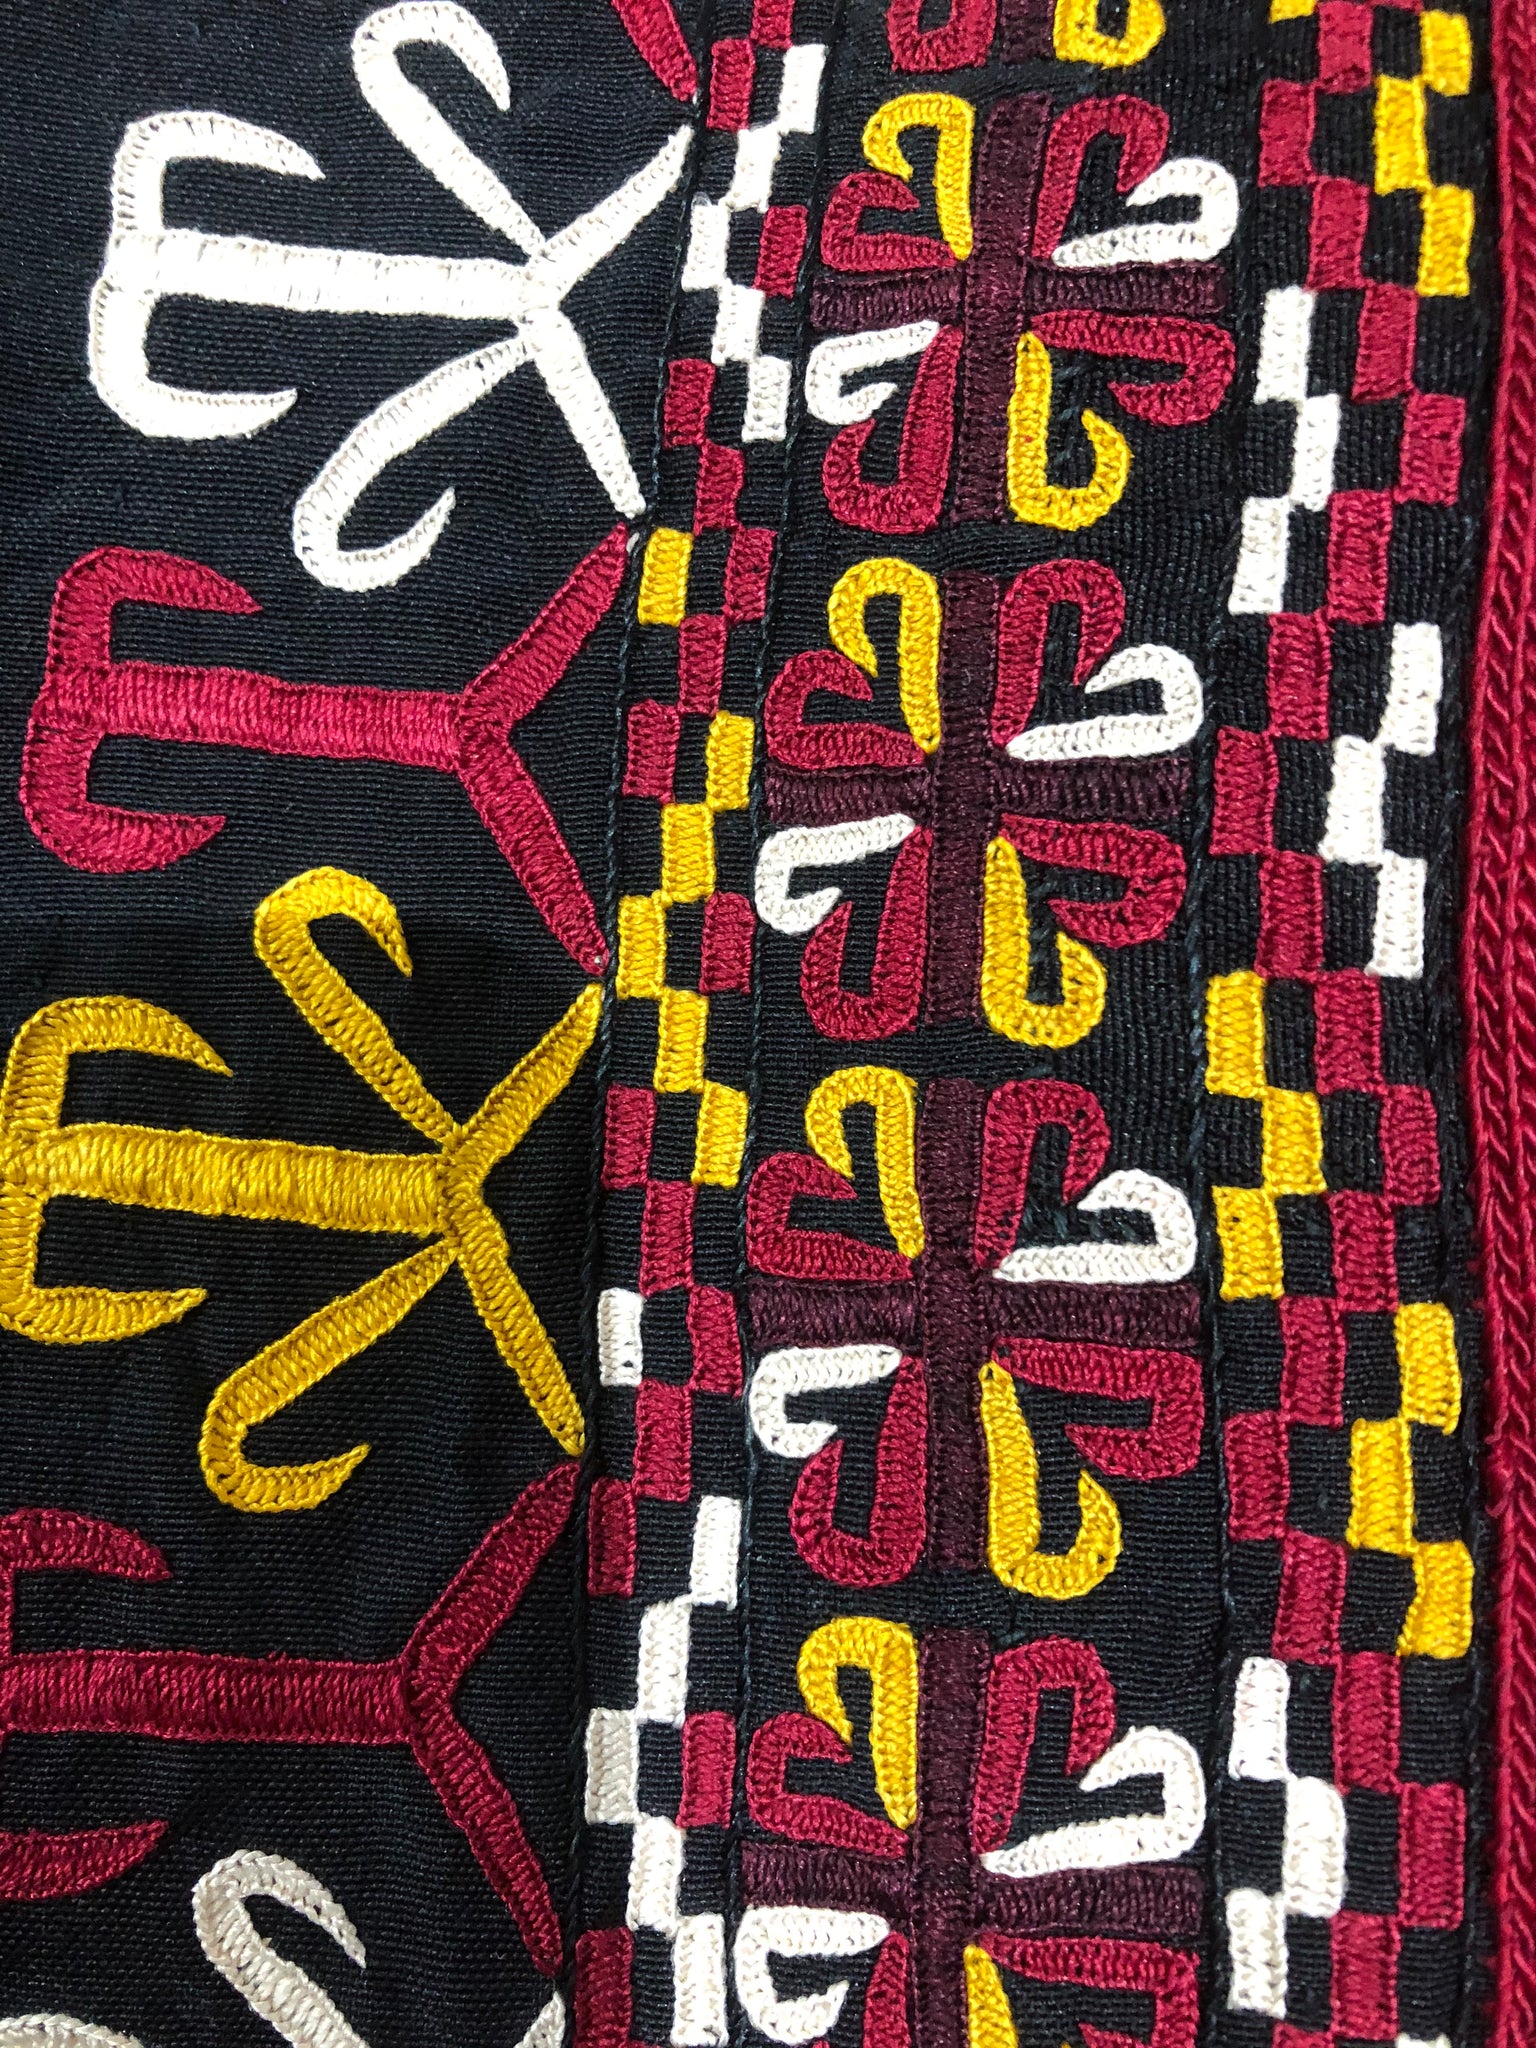 Mid 20th Century Hand Embroidered  Turkmenistan chyrpy Coat  CLOSE UP 5 of 5